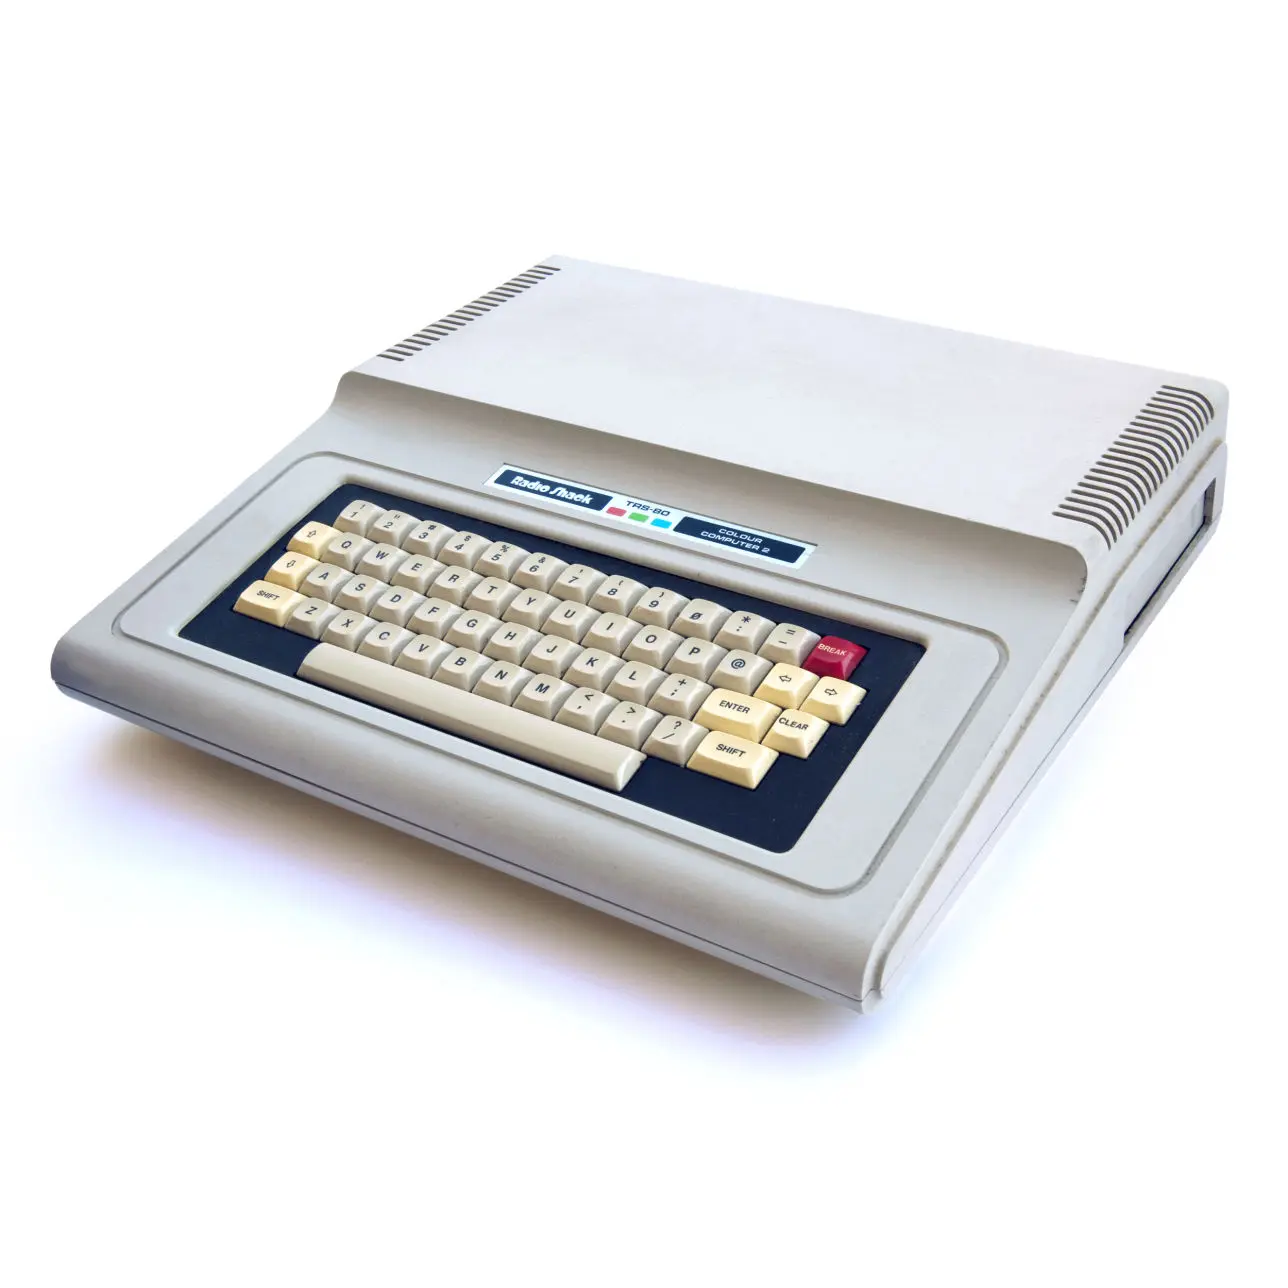 Learn More about the TRS80